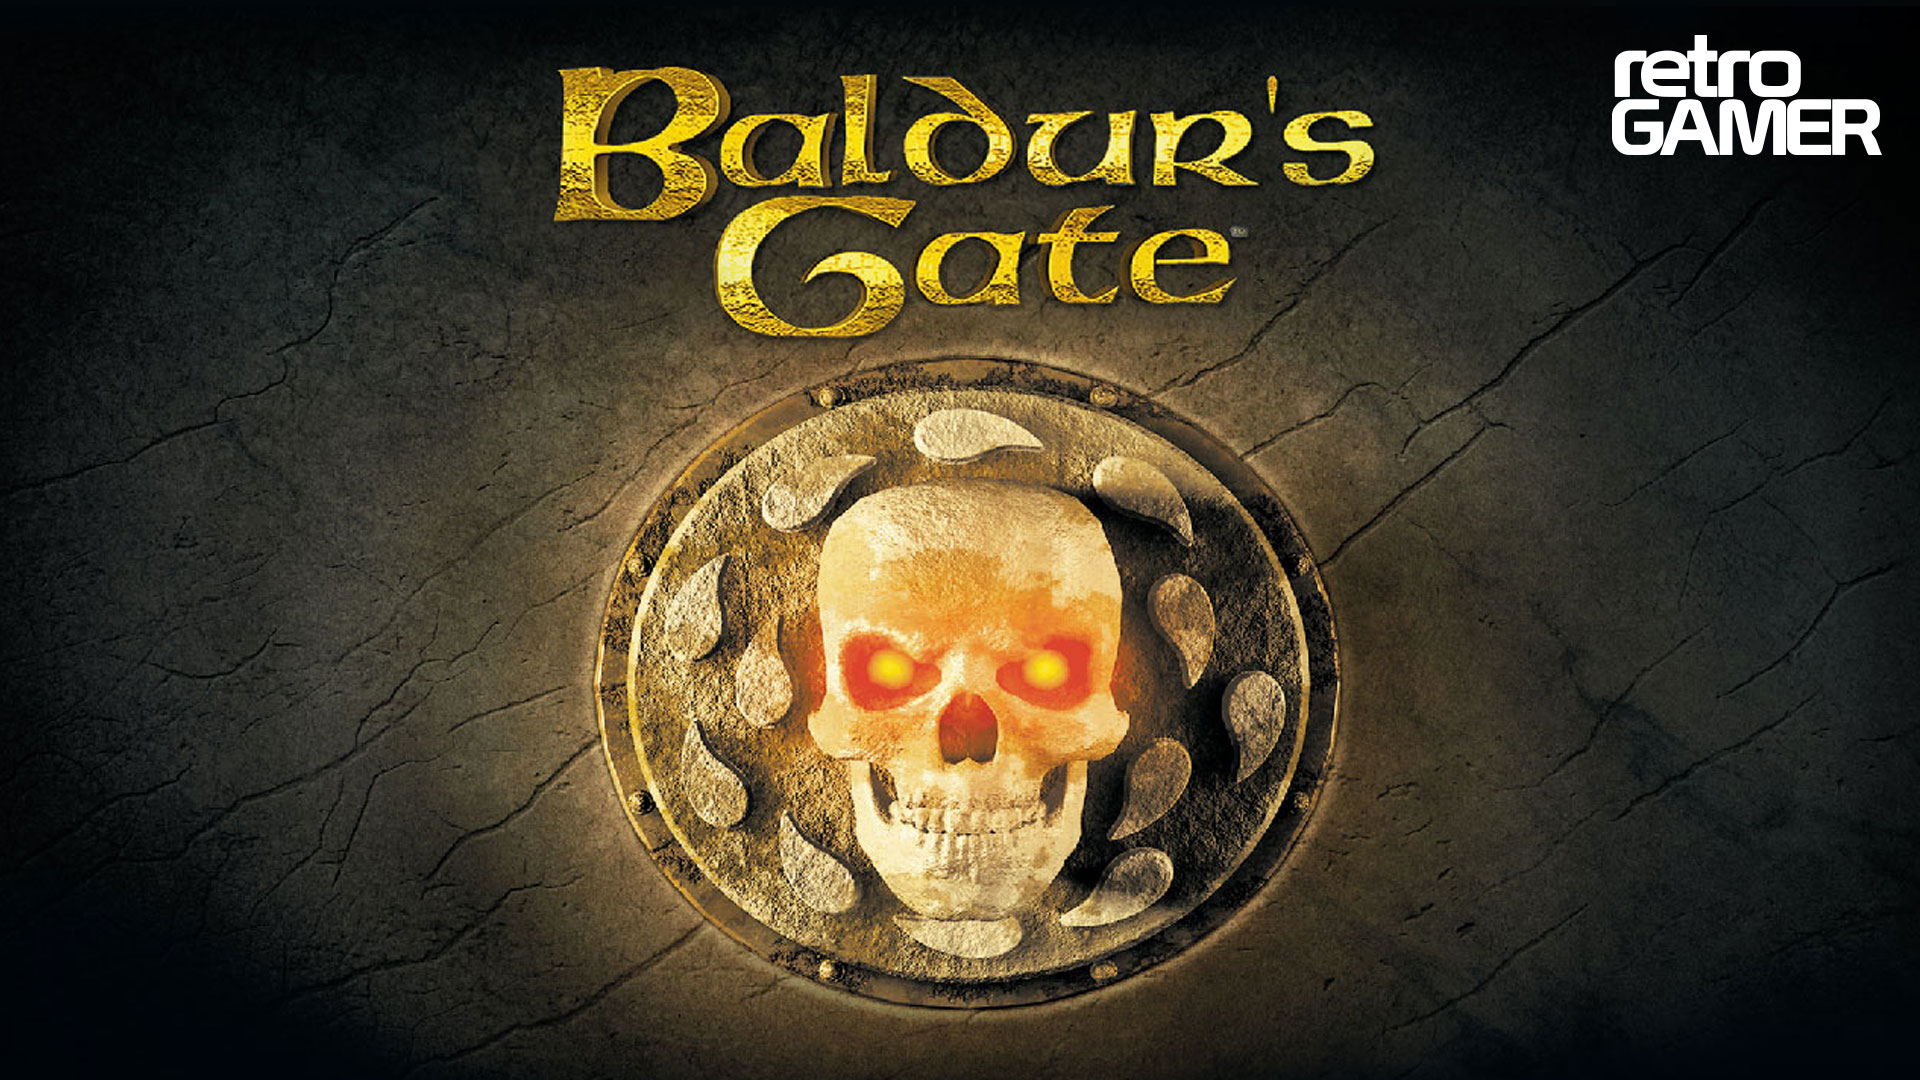 The making of Baldur’s Gate – the game that “single-handedly reinvigorated the western RPG”